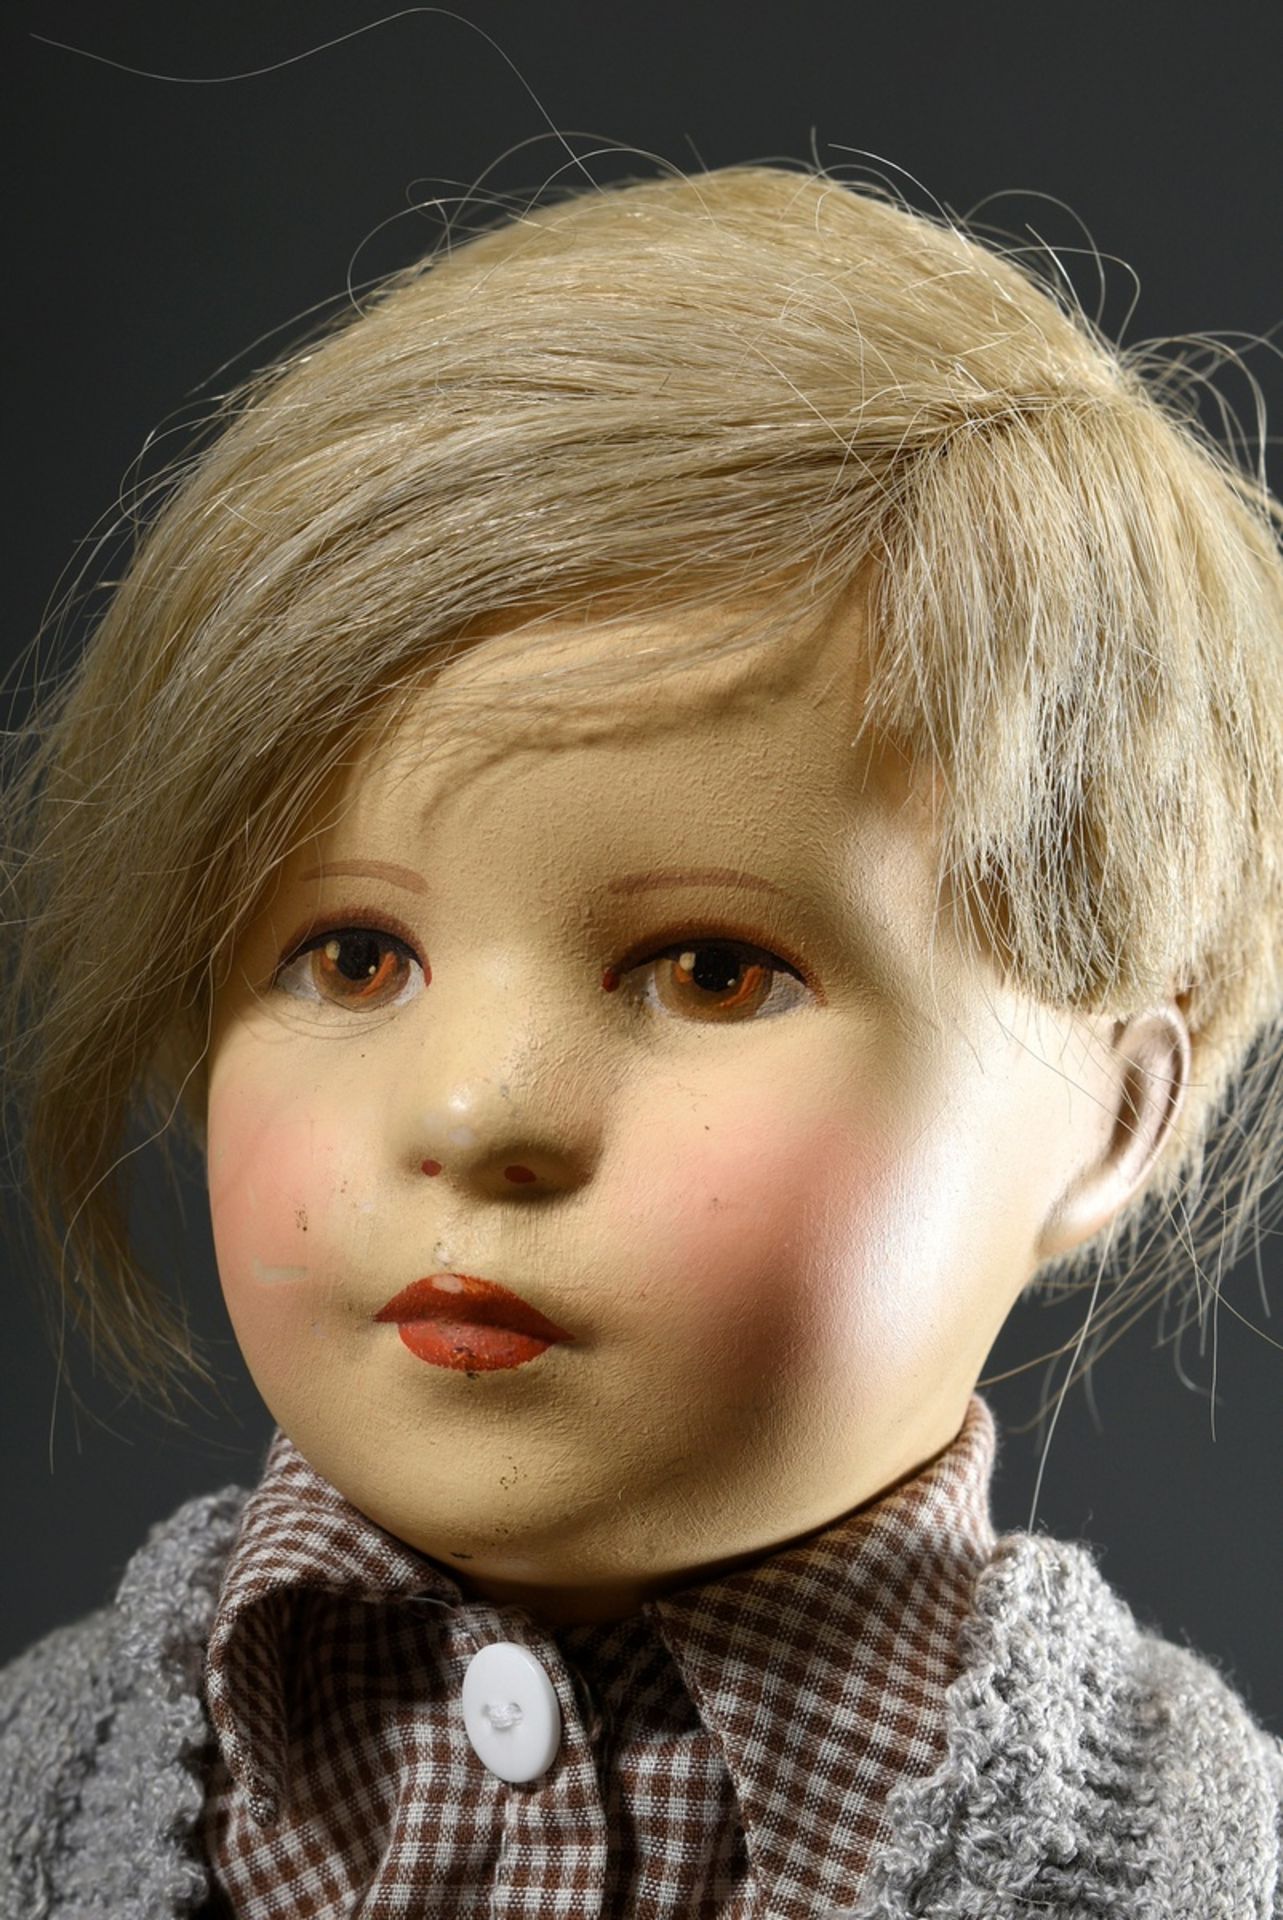 Käthe Kruse doll "Friedebald", mass crank head with real hair wig, nettle body, in traditional cost - Image 2 of 6